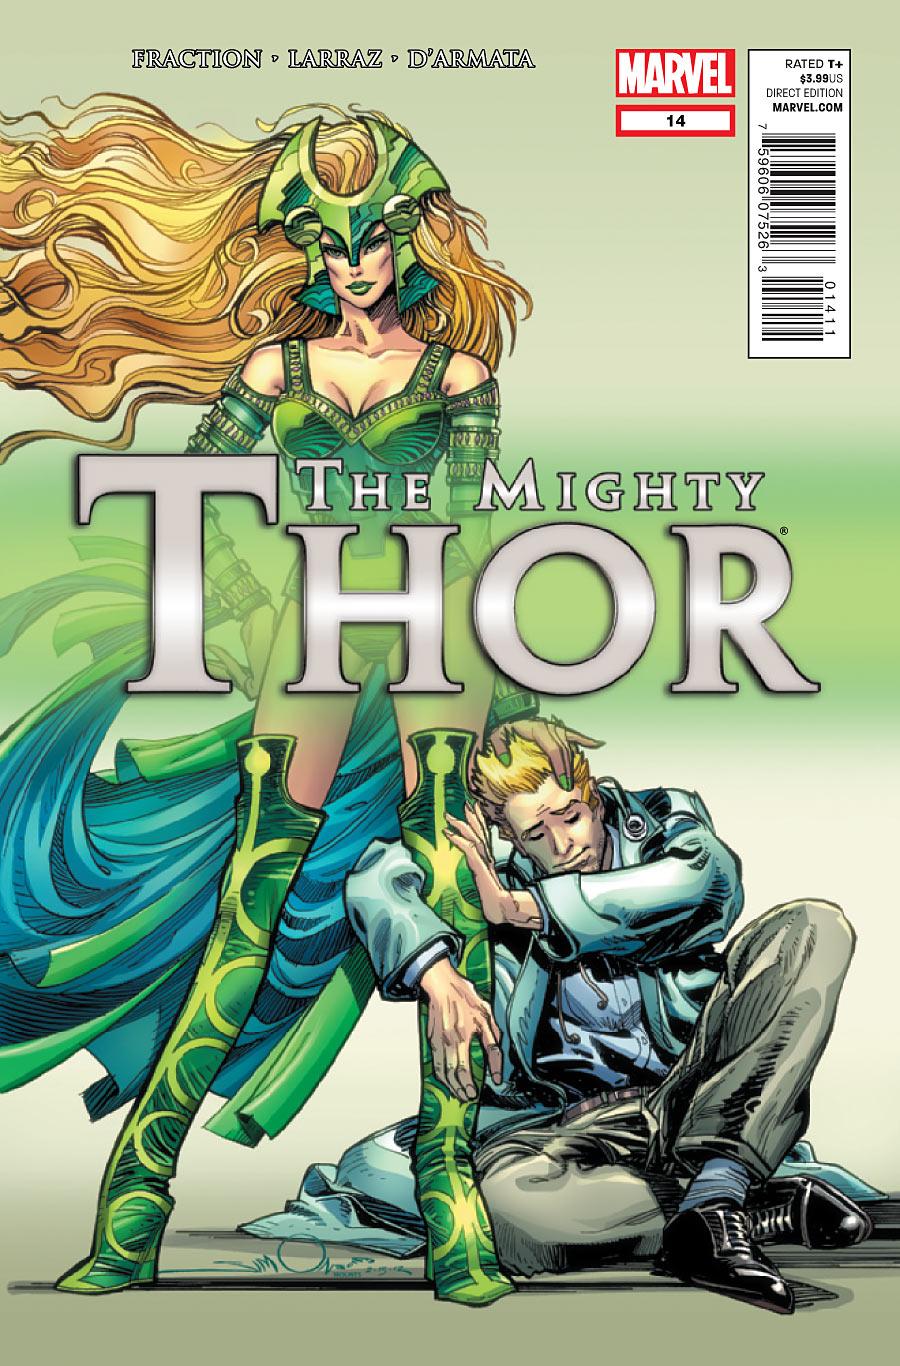 The Mighty Thor Vol. 1 #14